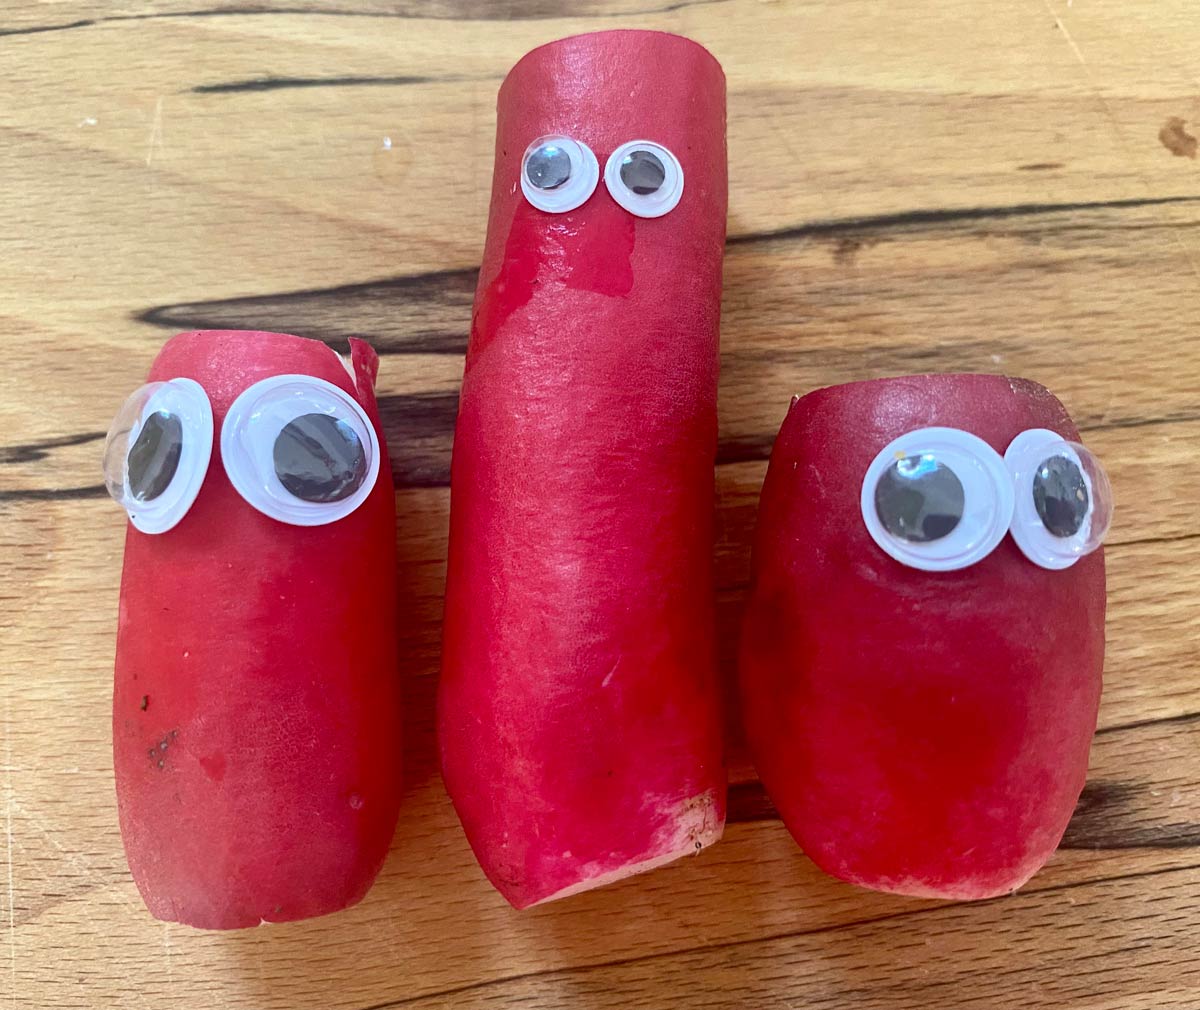 I put eyes on the radishes and now they’re living in fear of being eaten